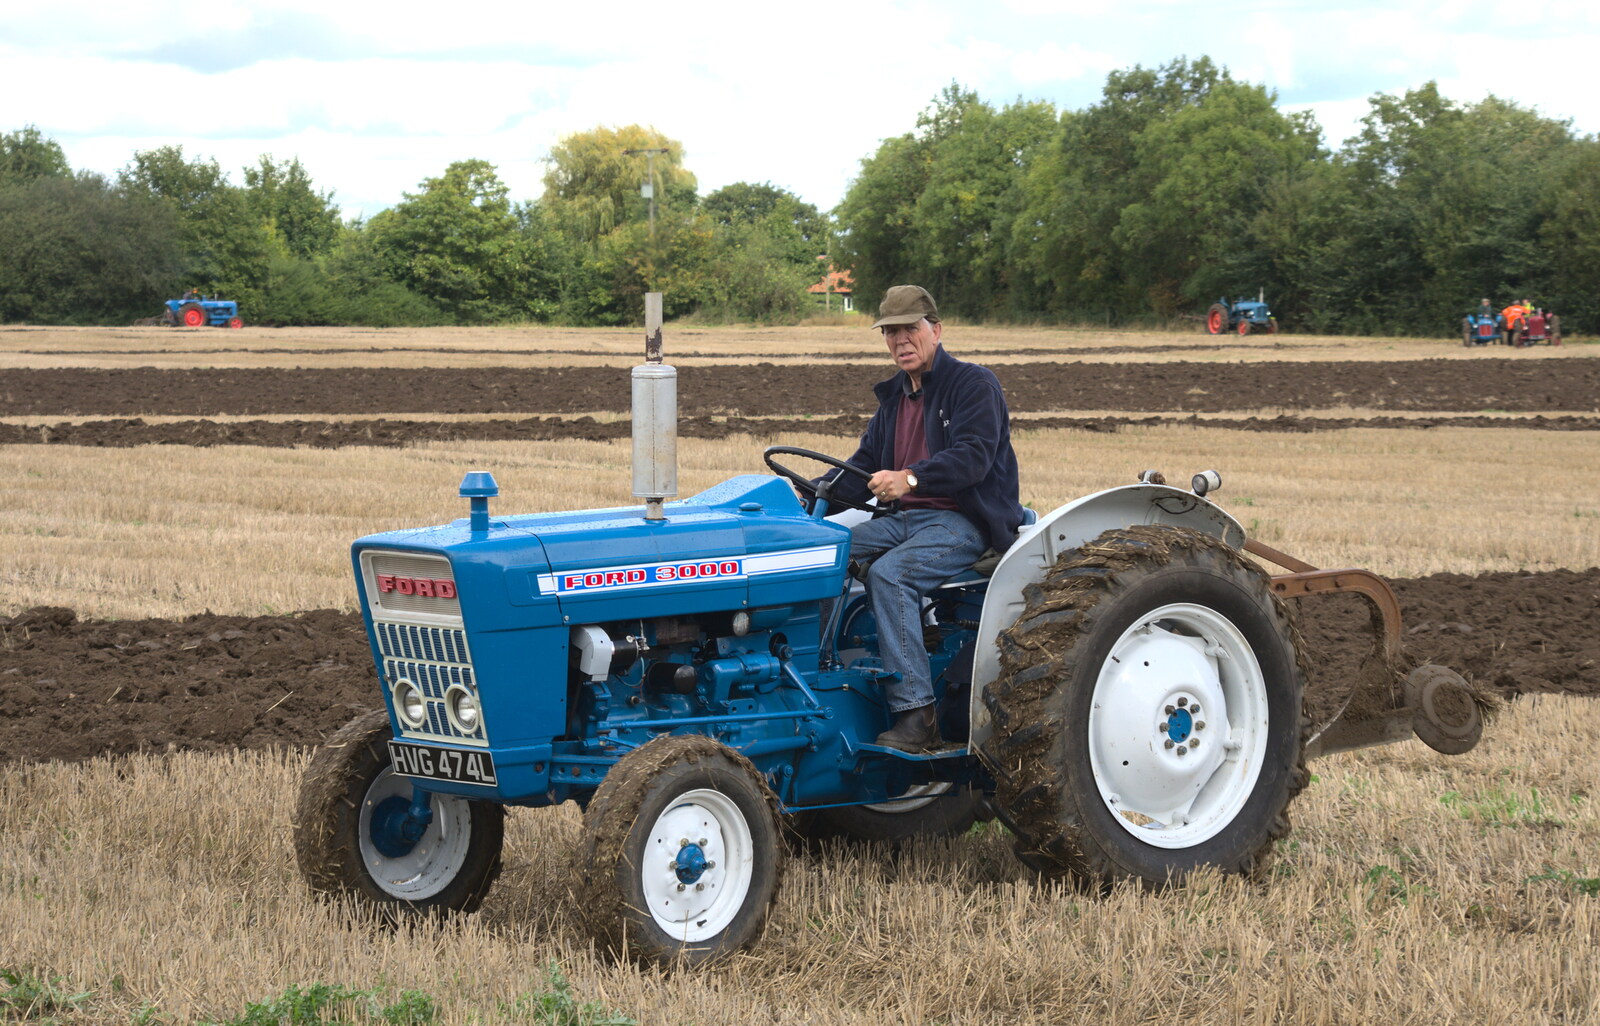 The Ford 3000 returns from Ploughing and Pizza, Thrandeston and Bury St. Edmunds, Suffolk - 17th September 2017